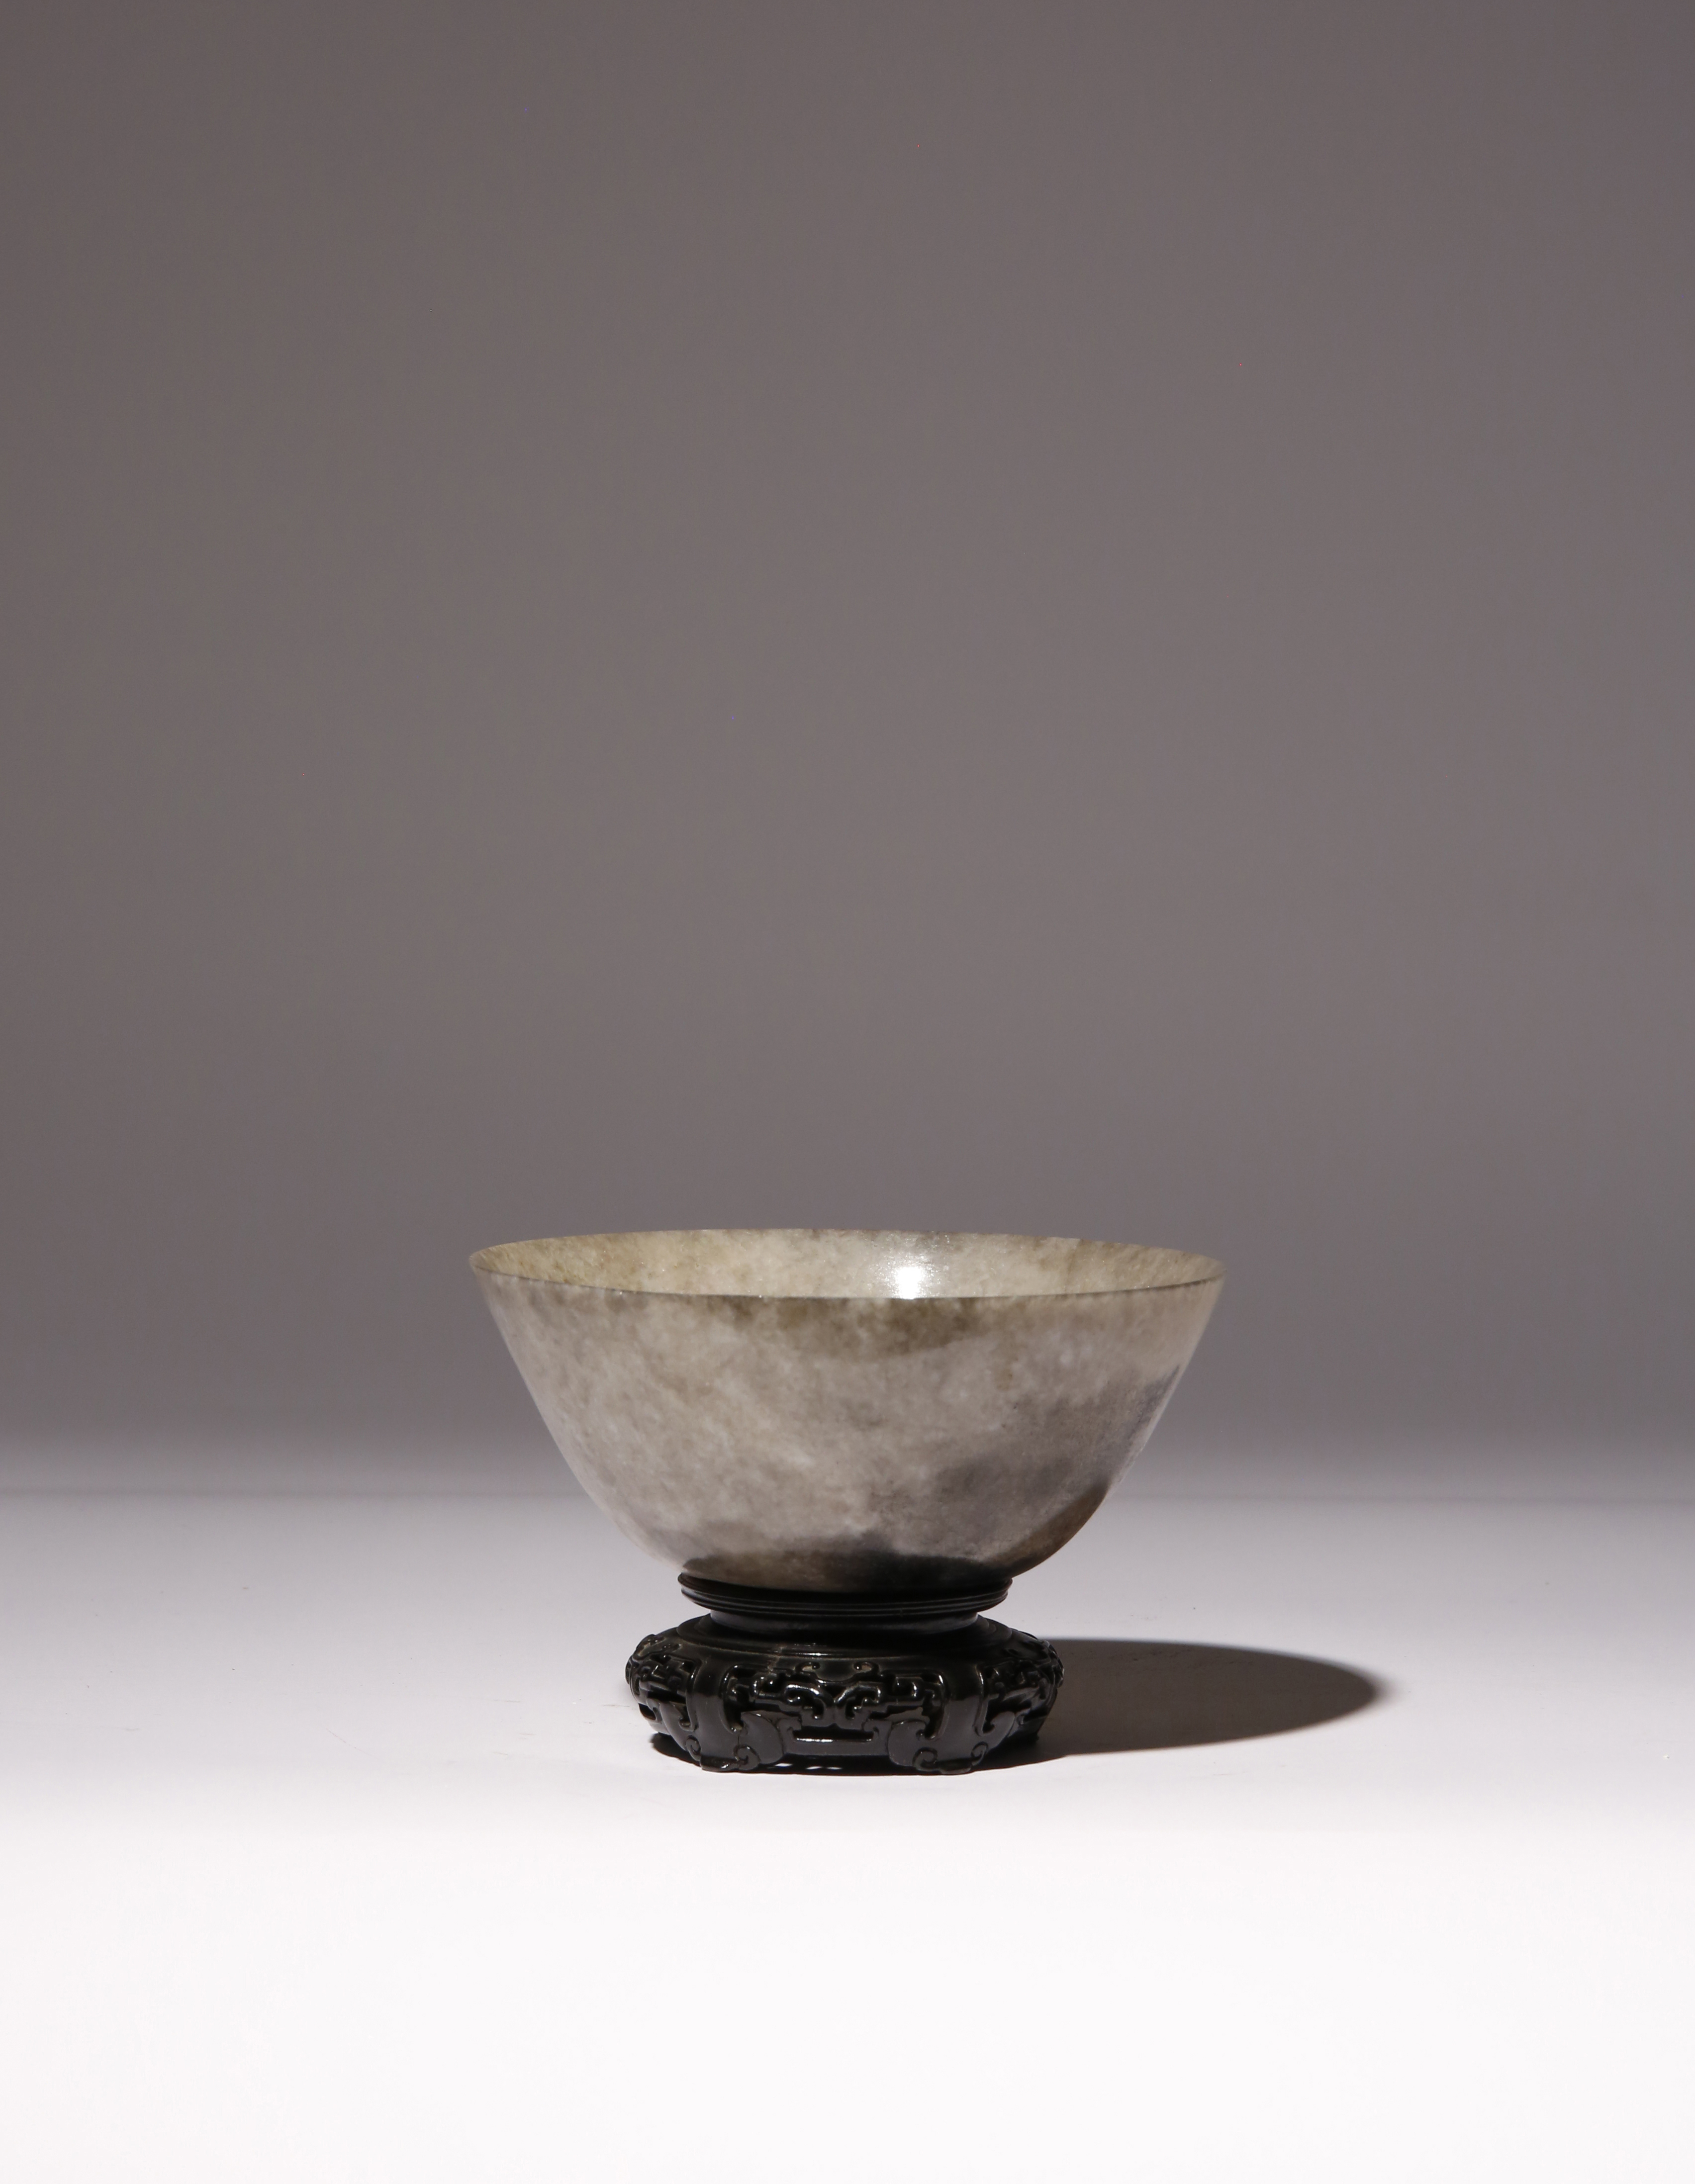 A CHINESE MOTTLED GREY AND BLACK JADE BOWL QING DYNASTY With curved sides gently thinning towards